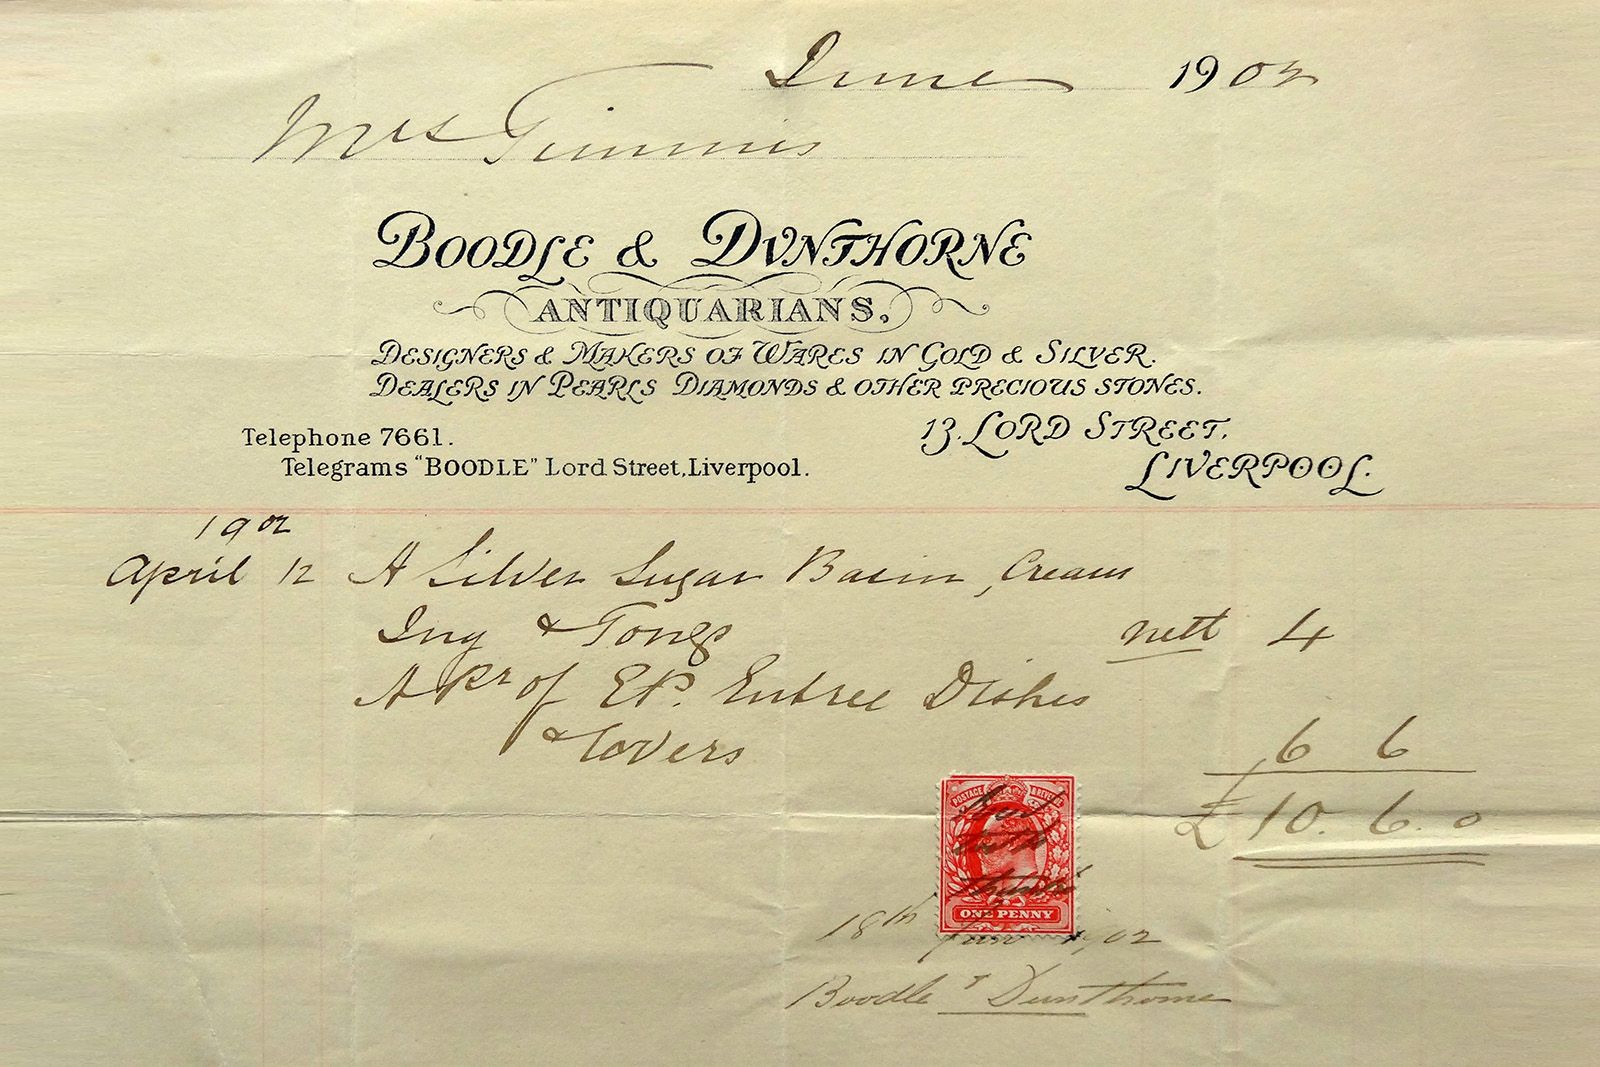 A Boodles telegram dating back to 1903